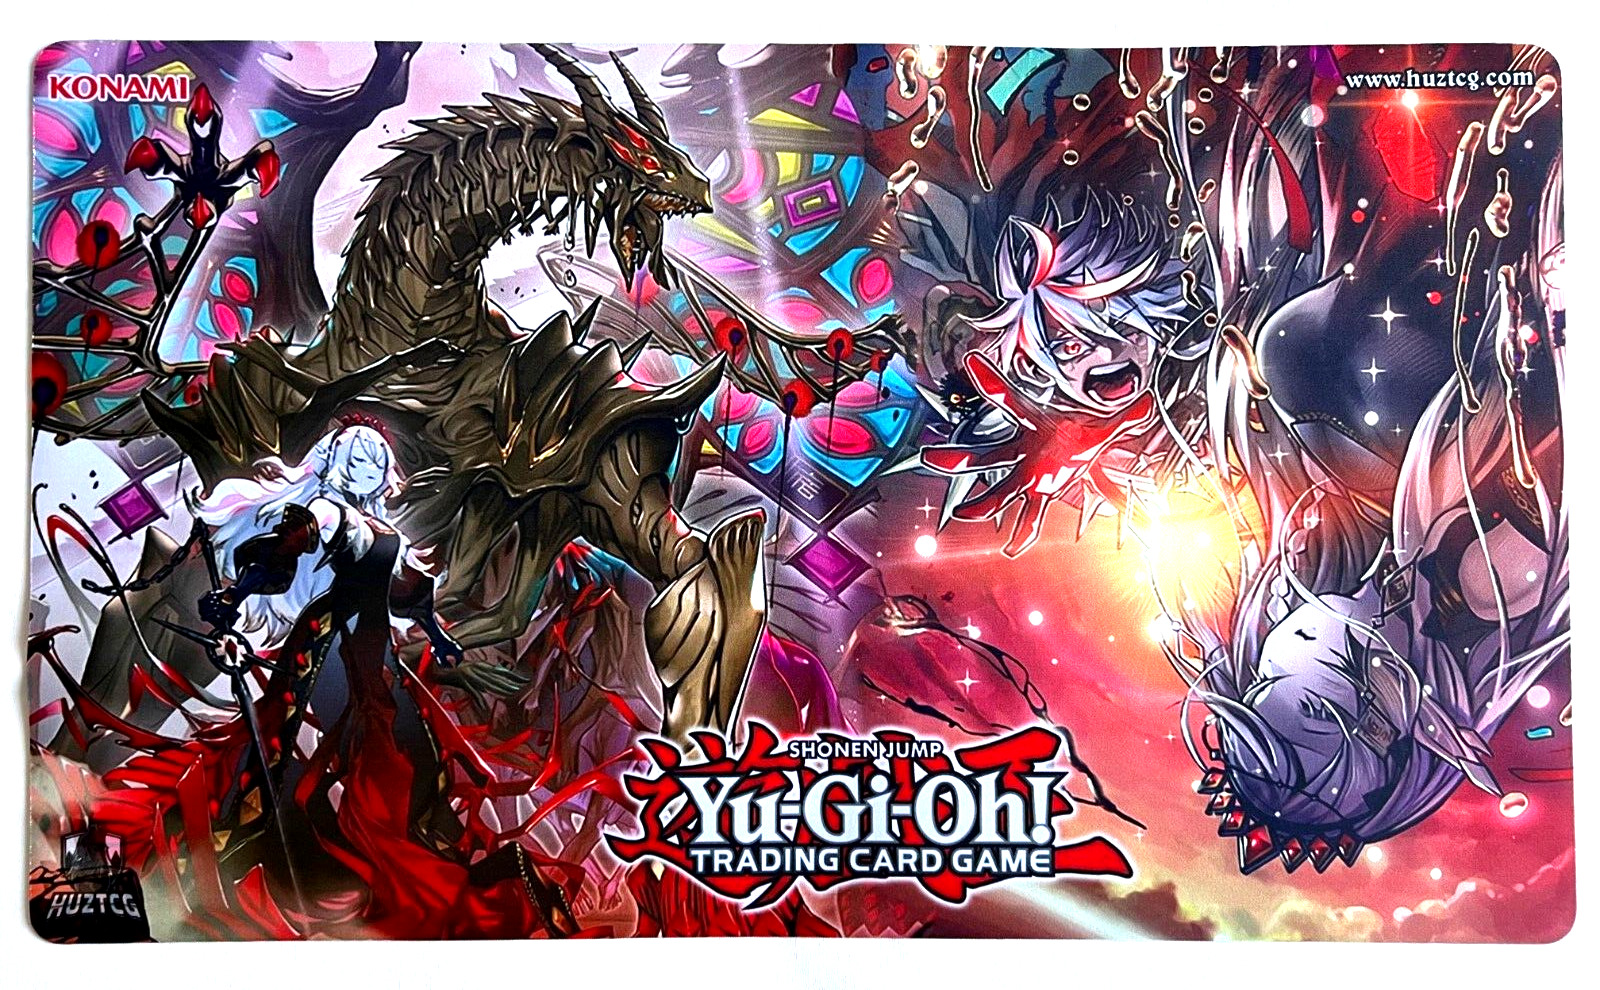 Yugioh - Branded Storyline Limited Edition Playmat - UK Based - In Hand